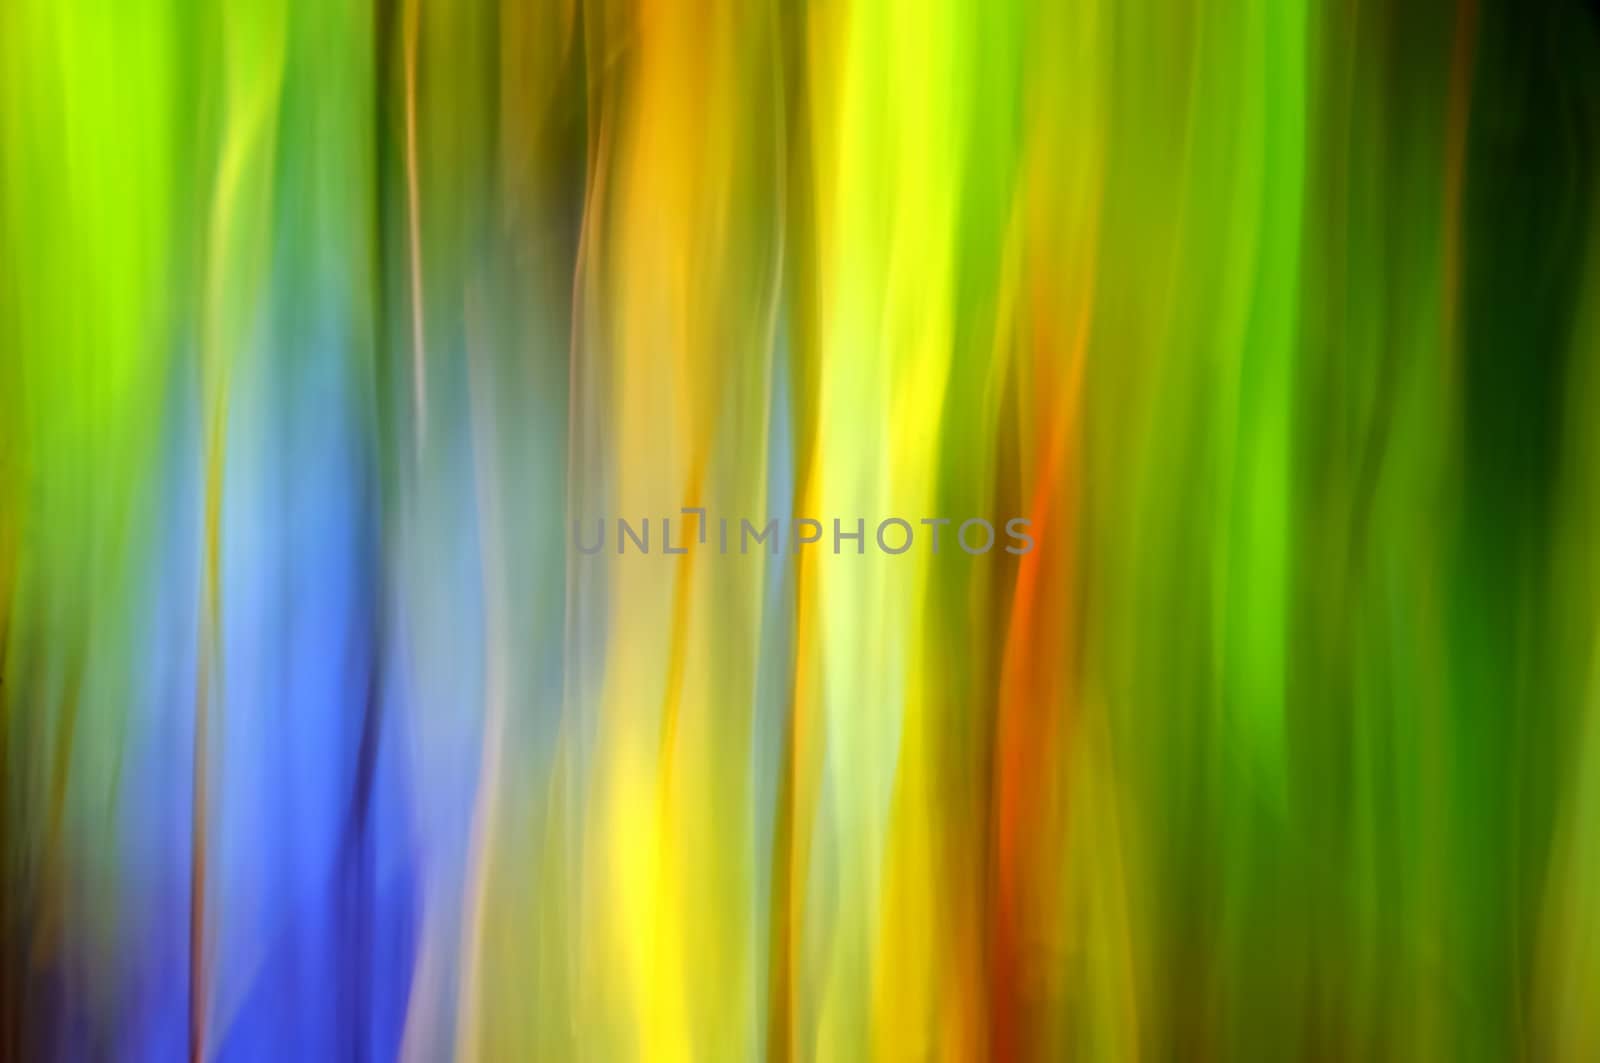 Abstract image with color and light in vertical lines